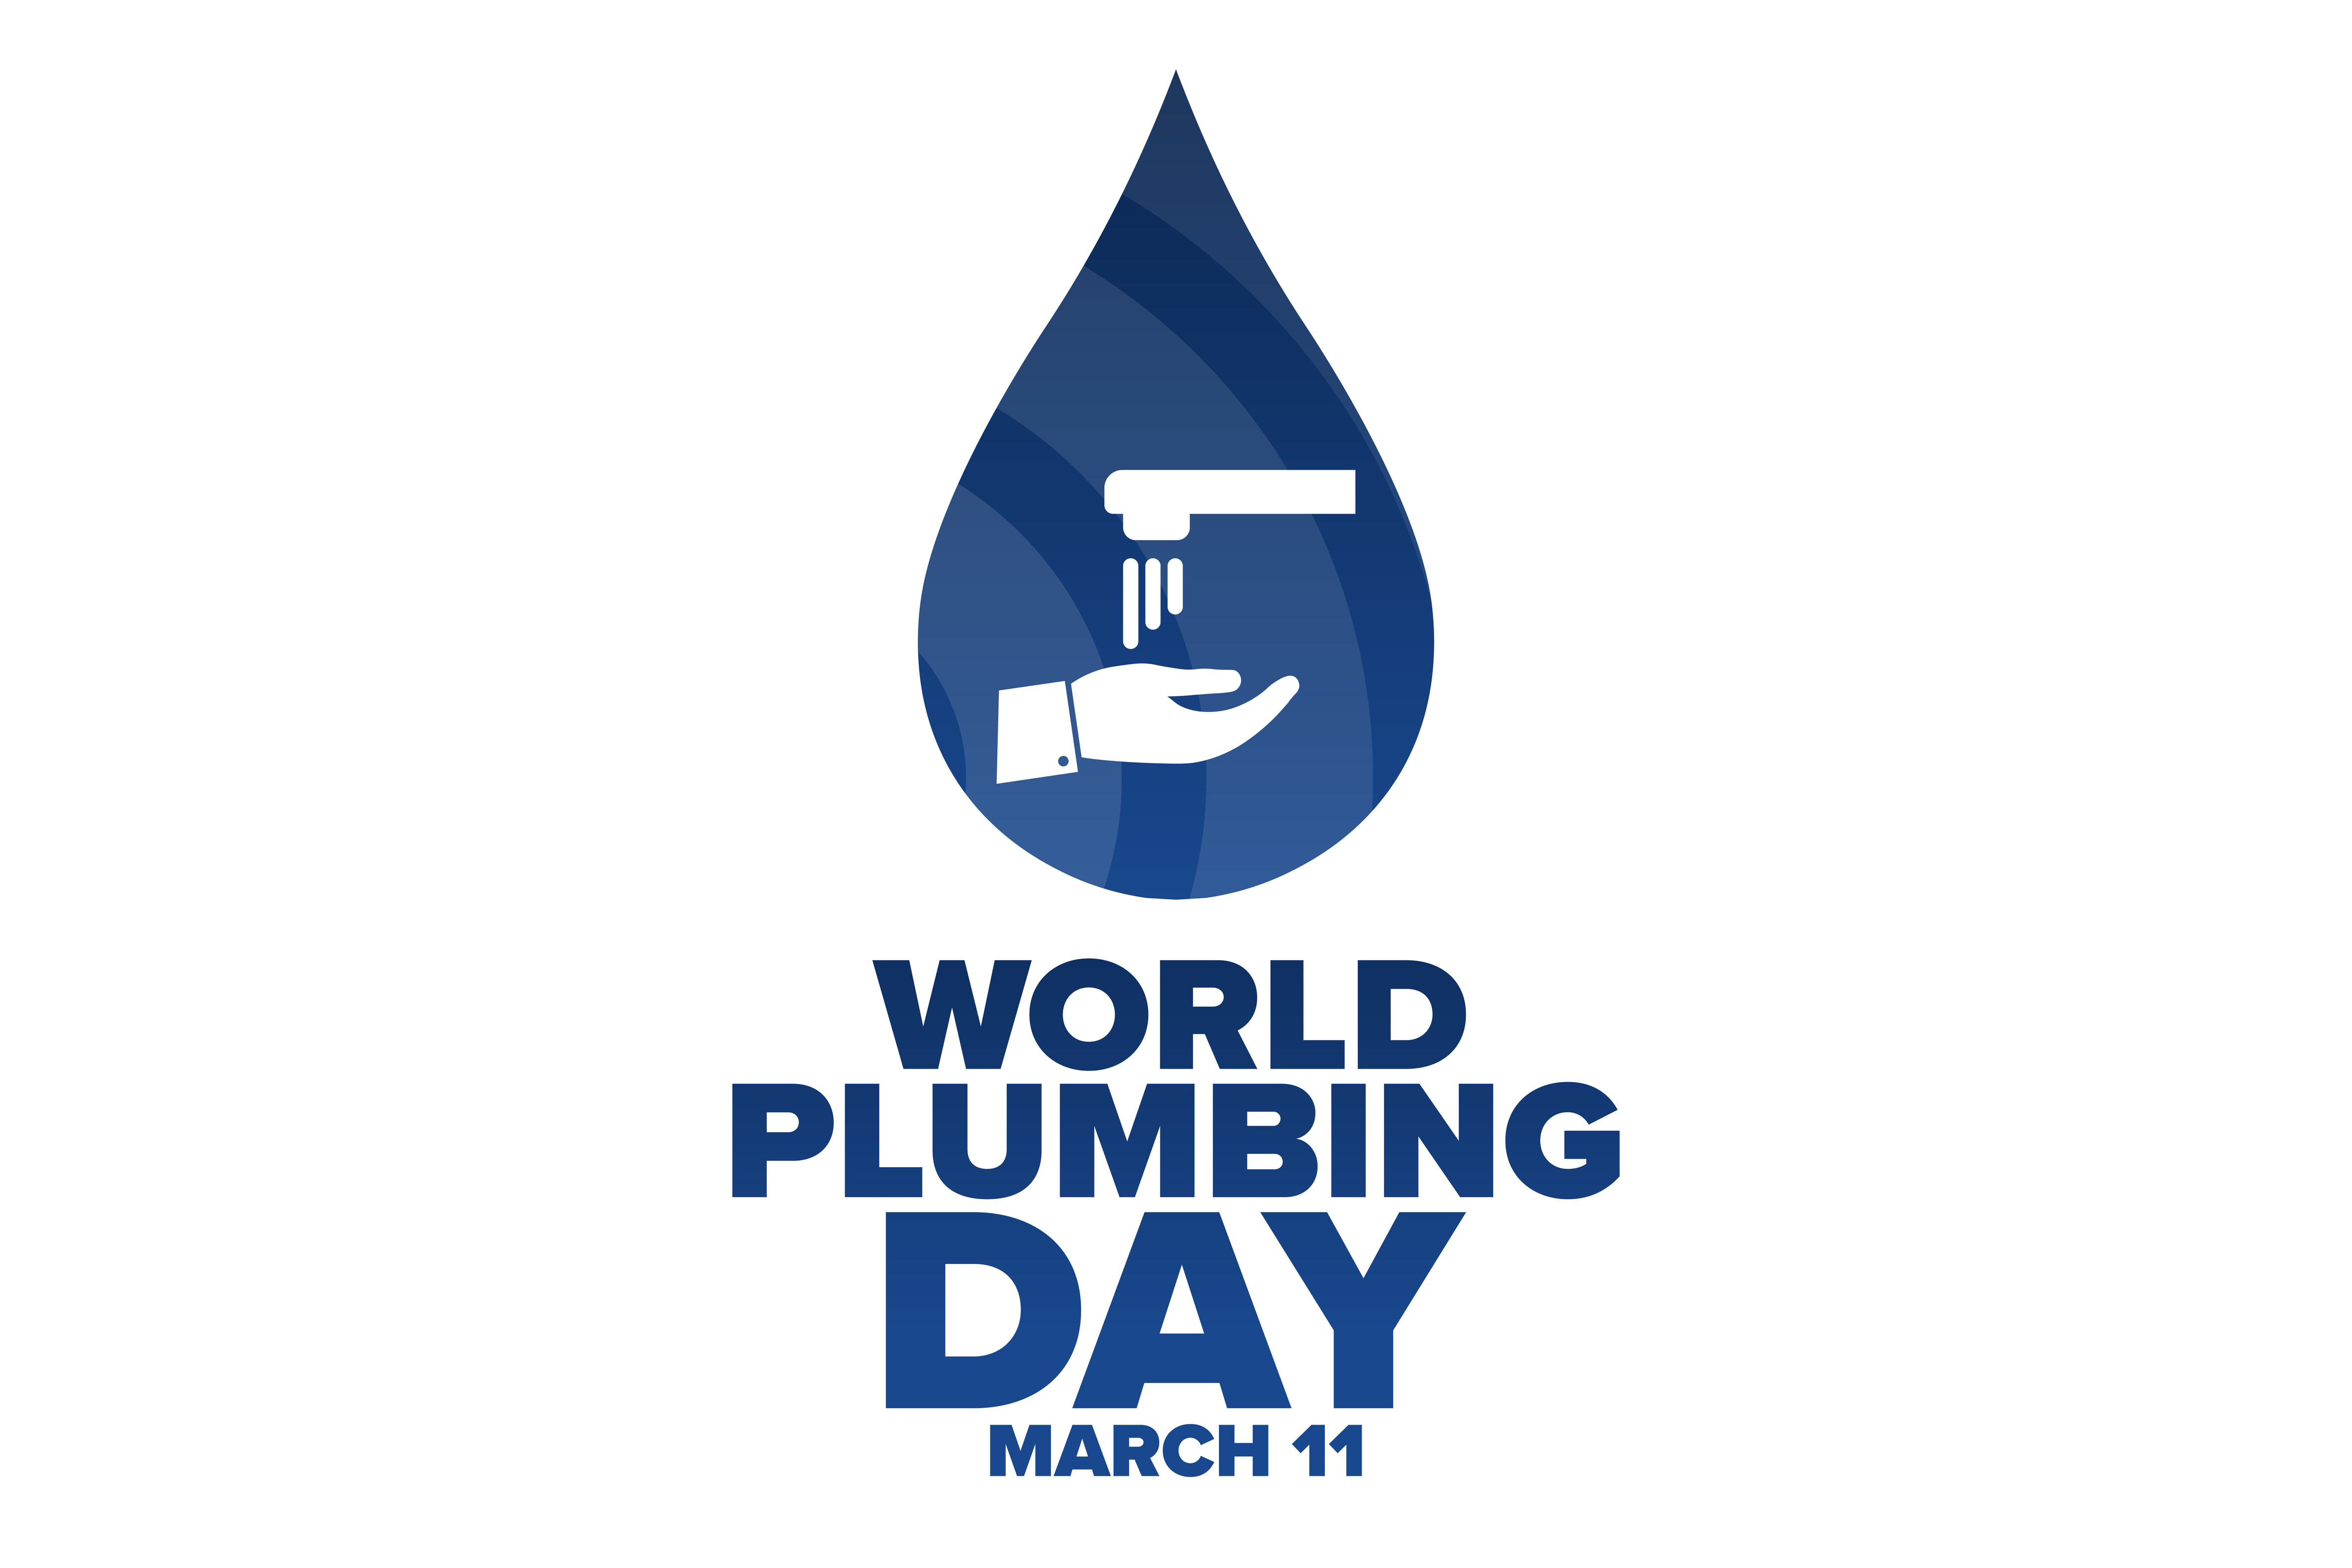 World Plumbing Day 2021: Why Plumbing is More Important than ever in a Covid World